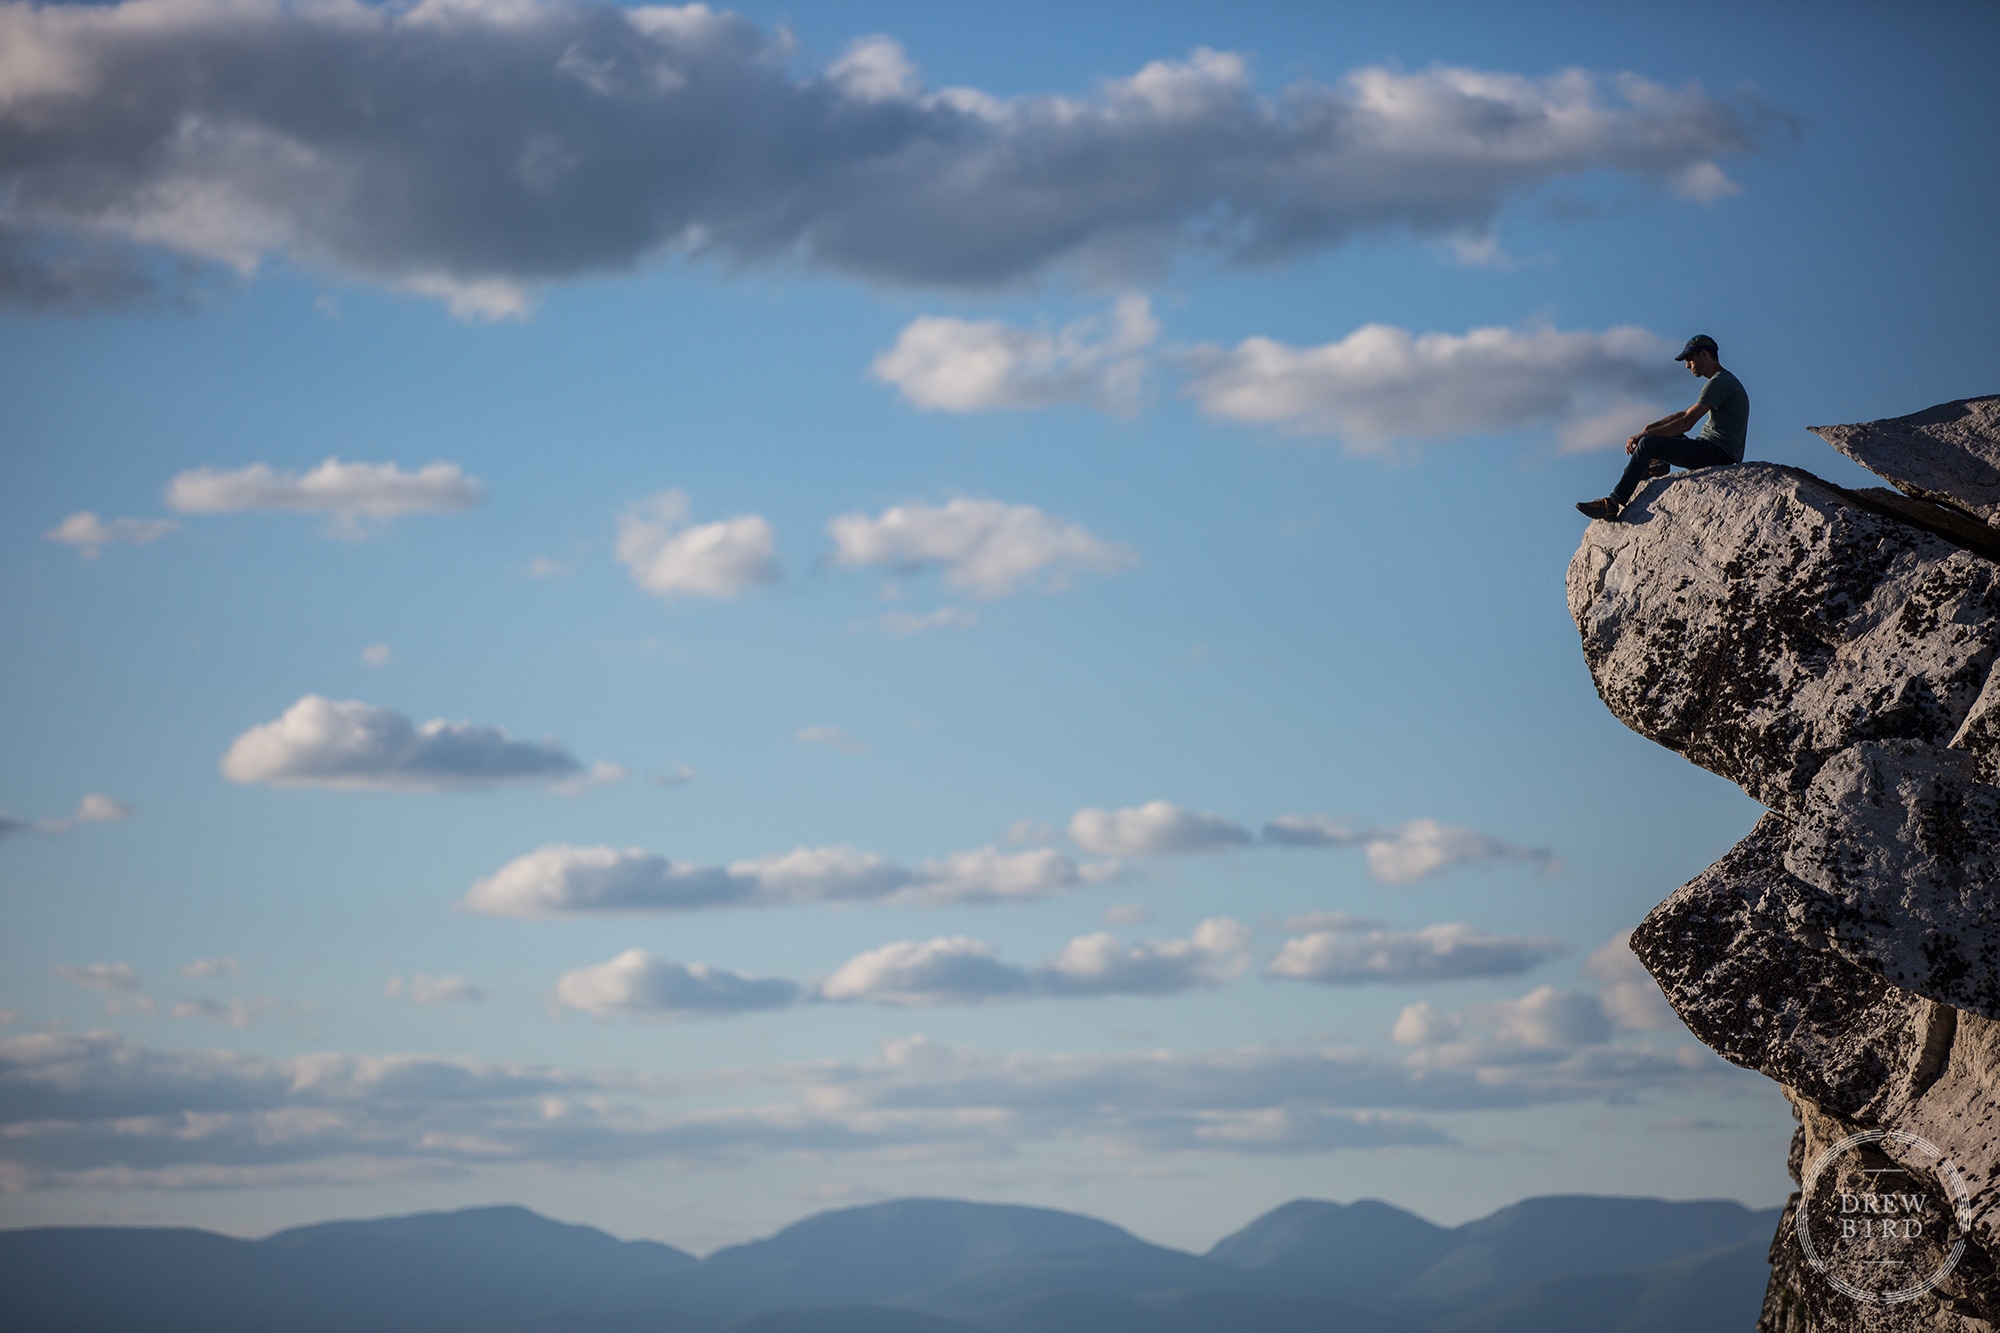 Man sitting on a cliff edge in the Gunks commercial photo for rock climbing lifestyle photo shoot.